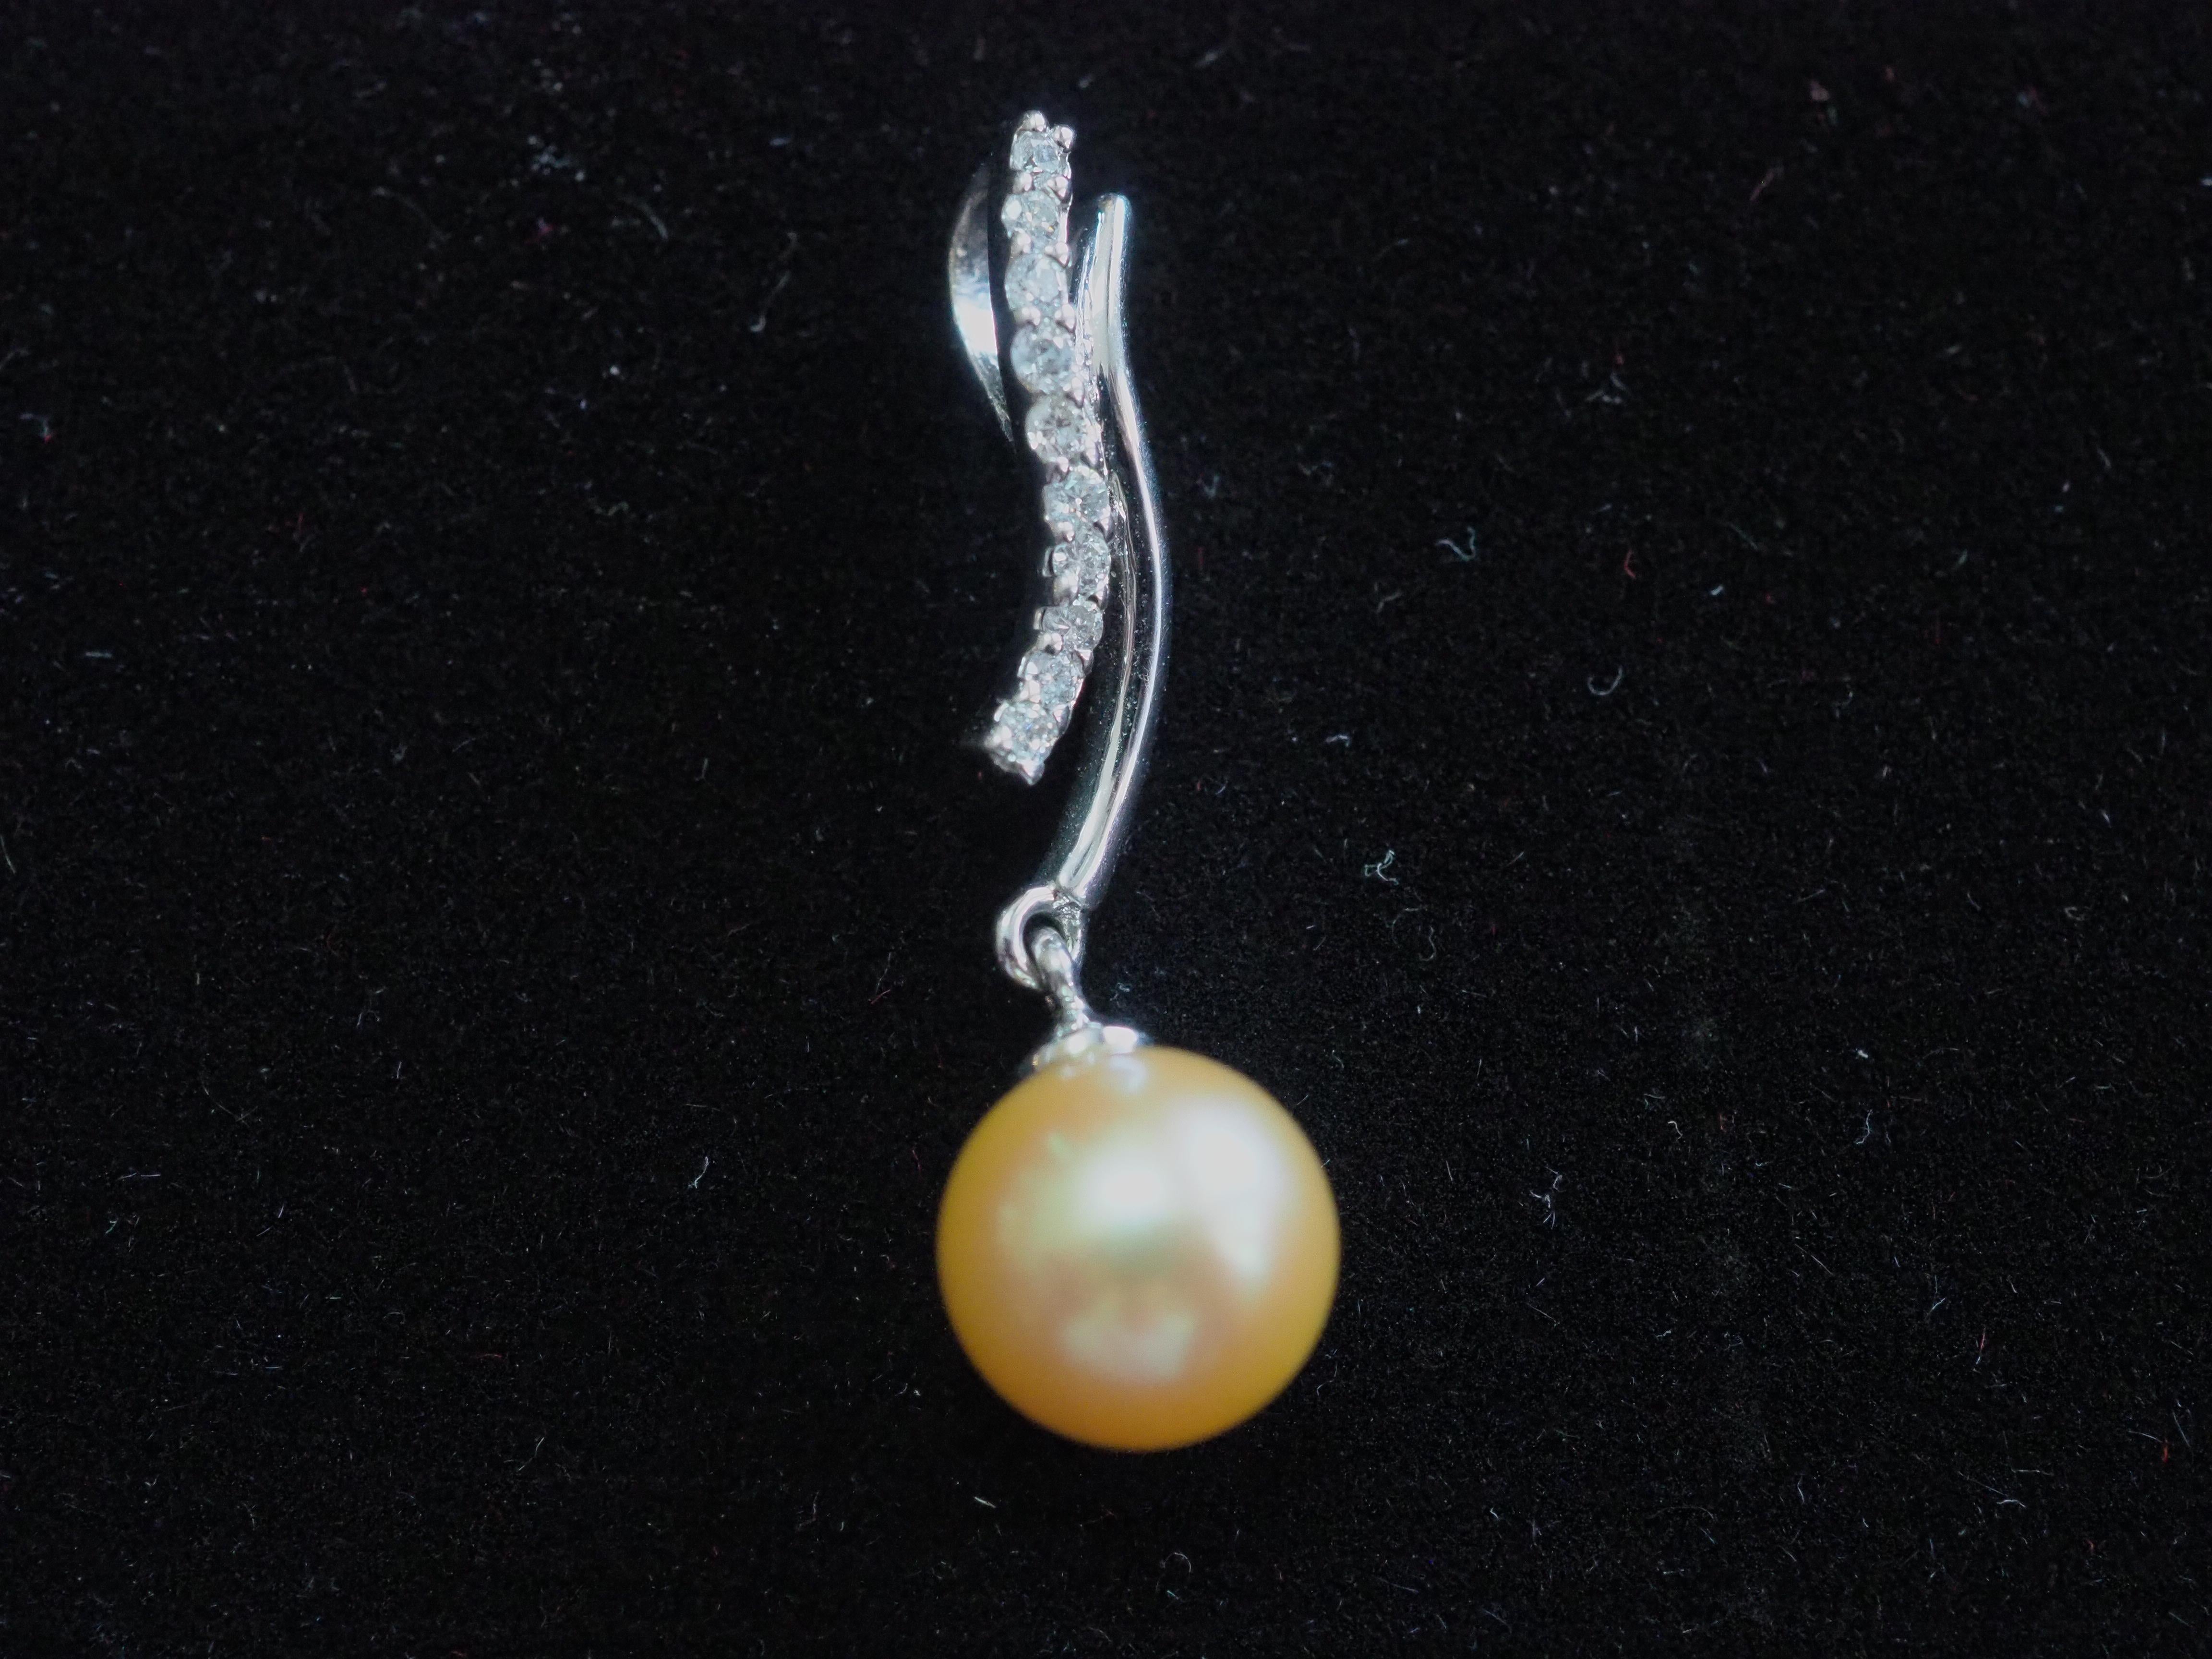 A beautiful and quality drop pendant enhancer. This beautiful piece is crafted using 18K white gold. The piece is adorned with a gorgeous 7.1mm unblemished golden sea pearl and with 0.07 carats of melee diamonds surrounding and icing over the white